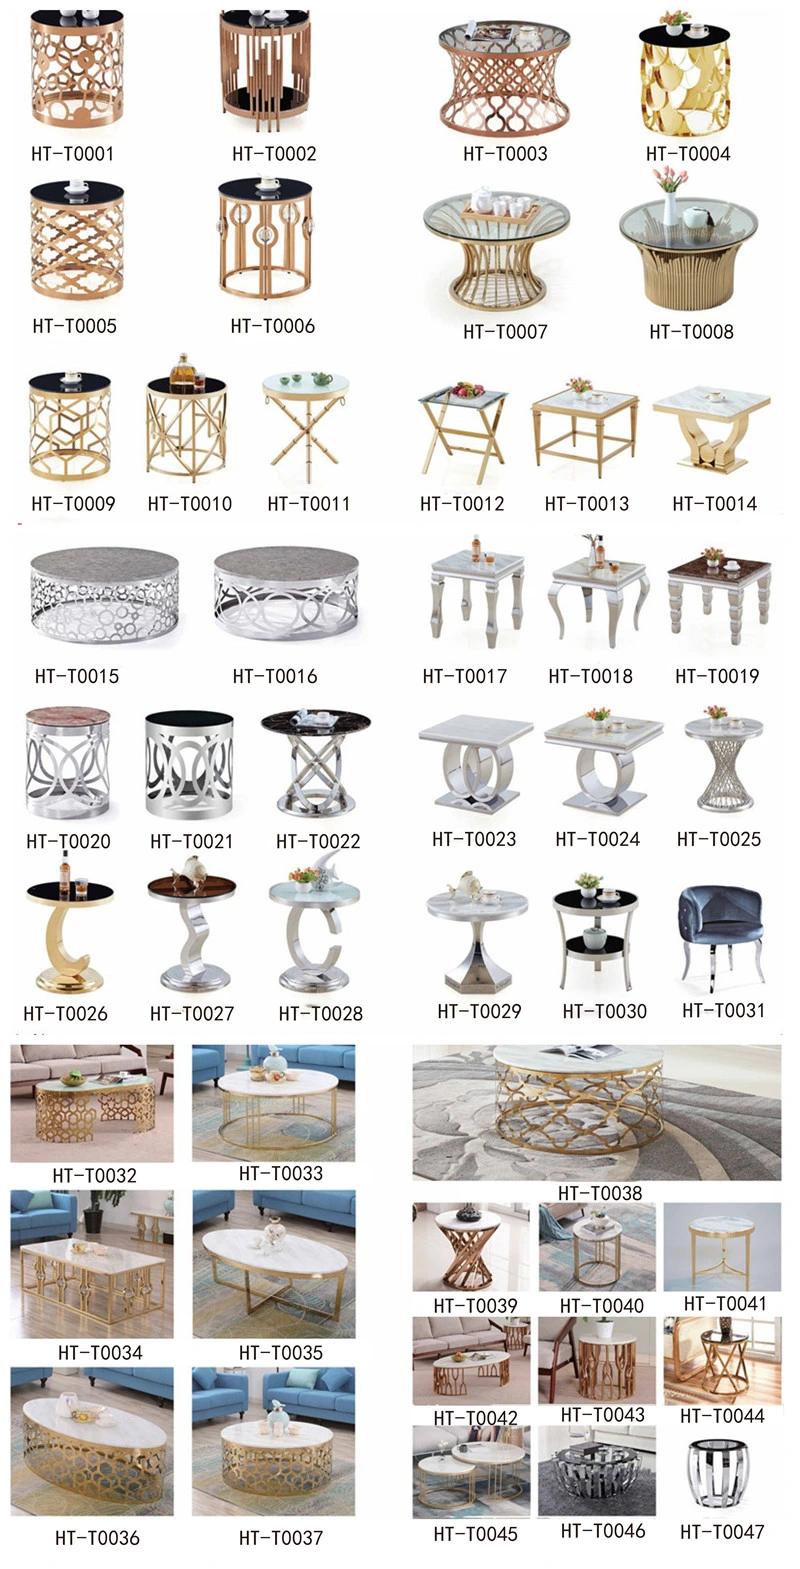 Customized Living Room Furniture Stainless Steel Marble Coffee Table Round Side Table